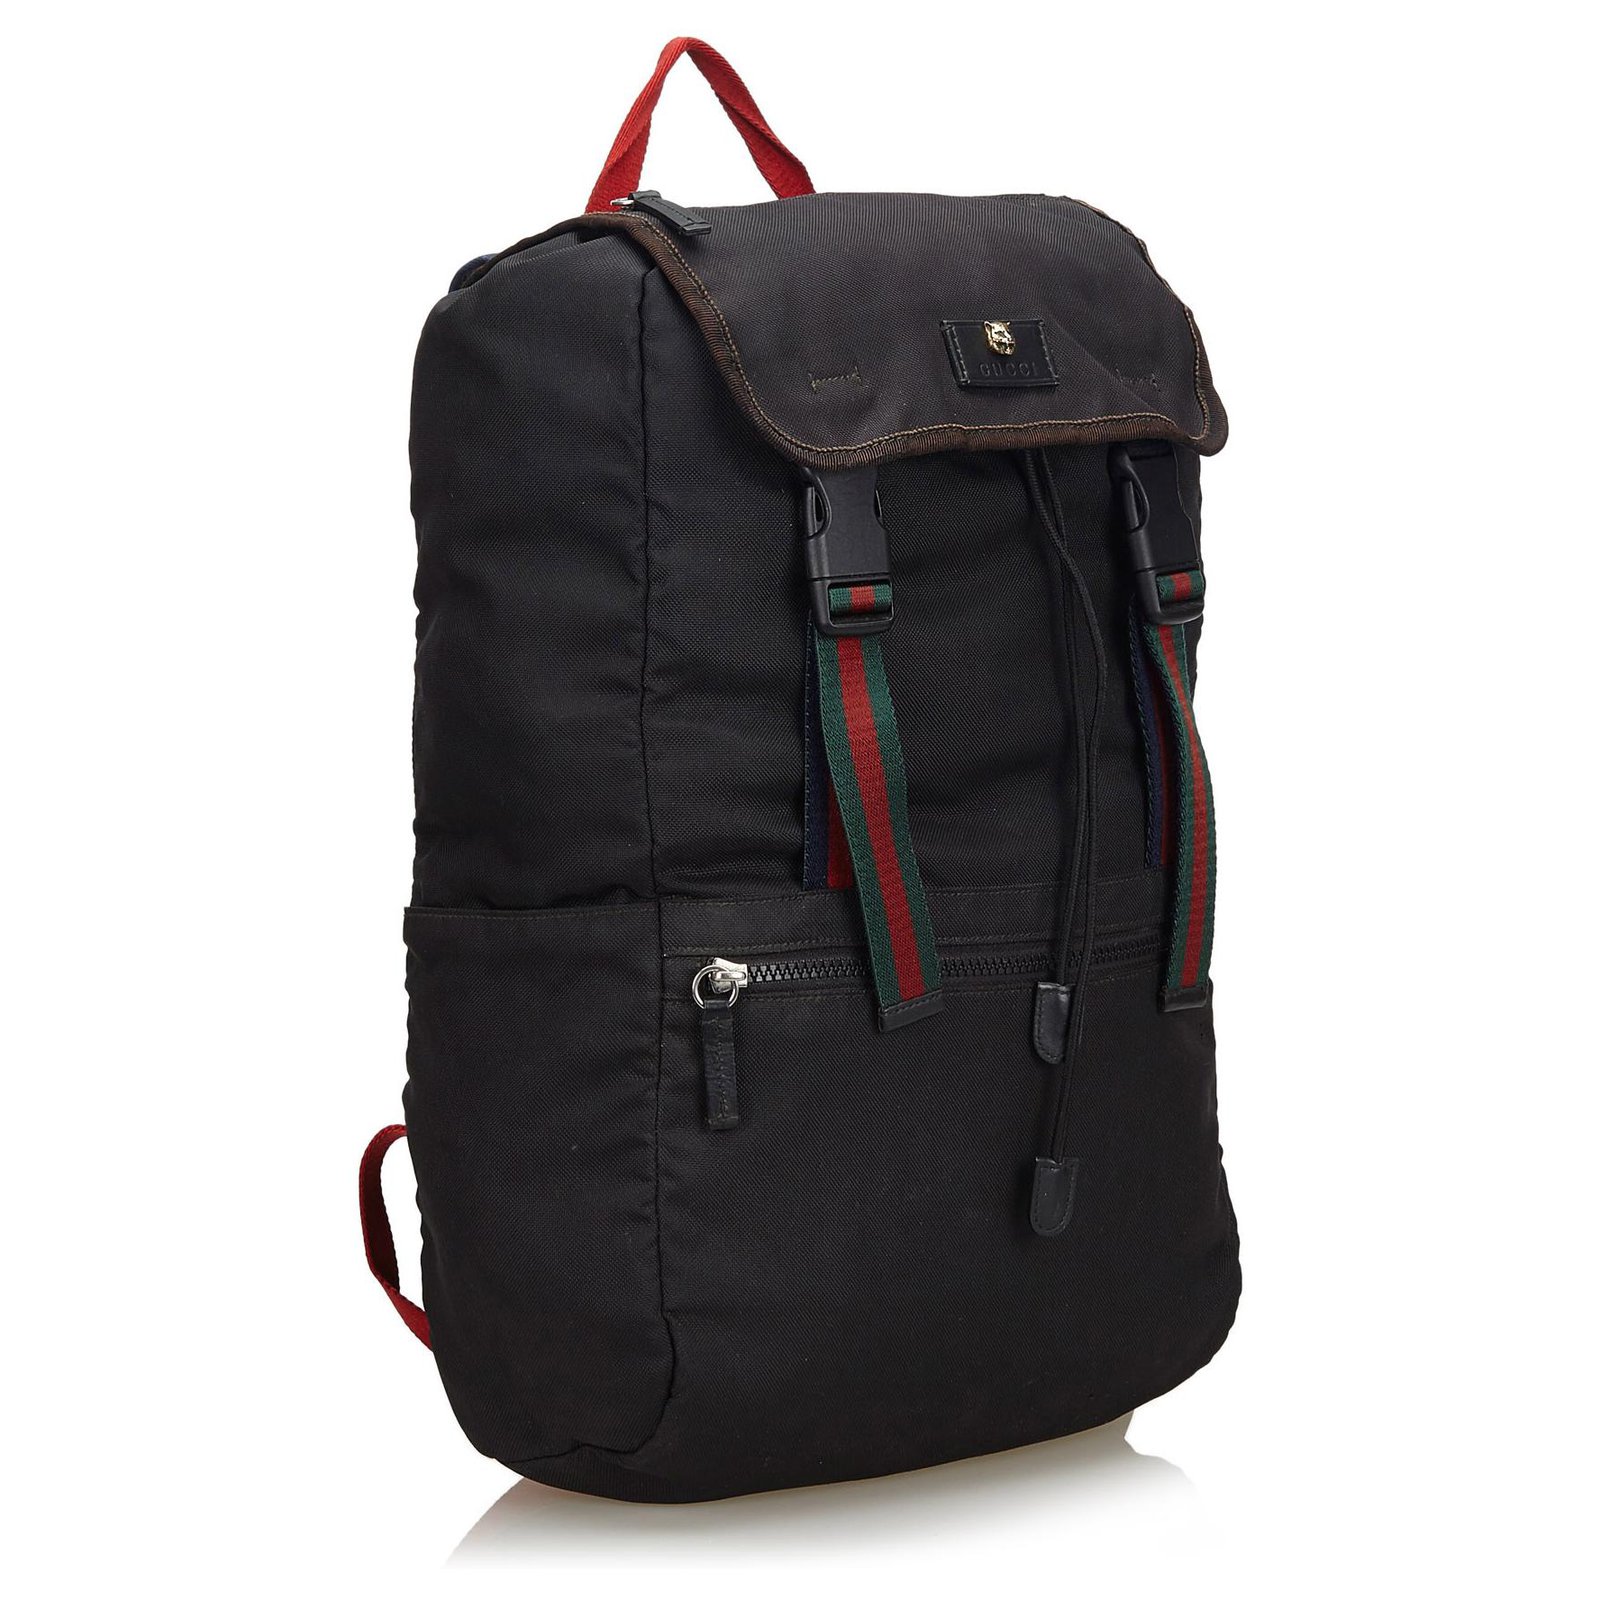 techno canvas backpack